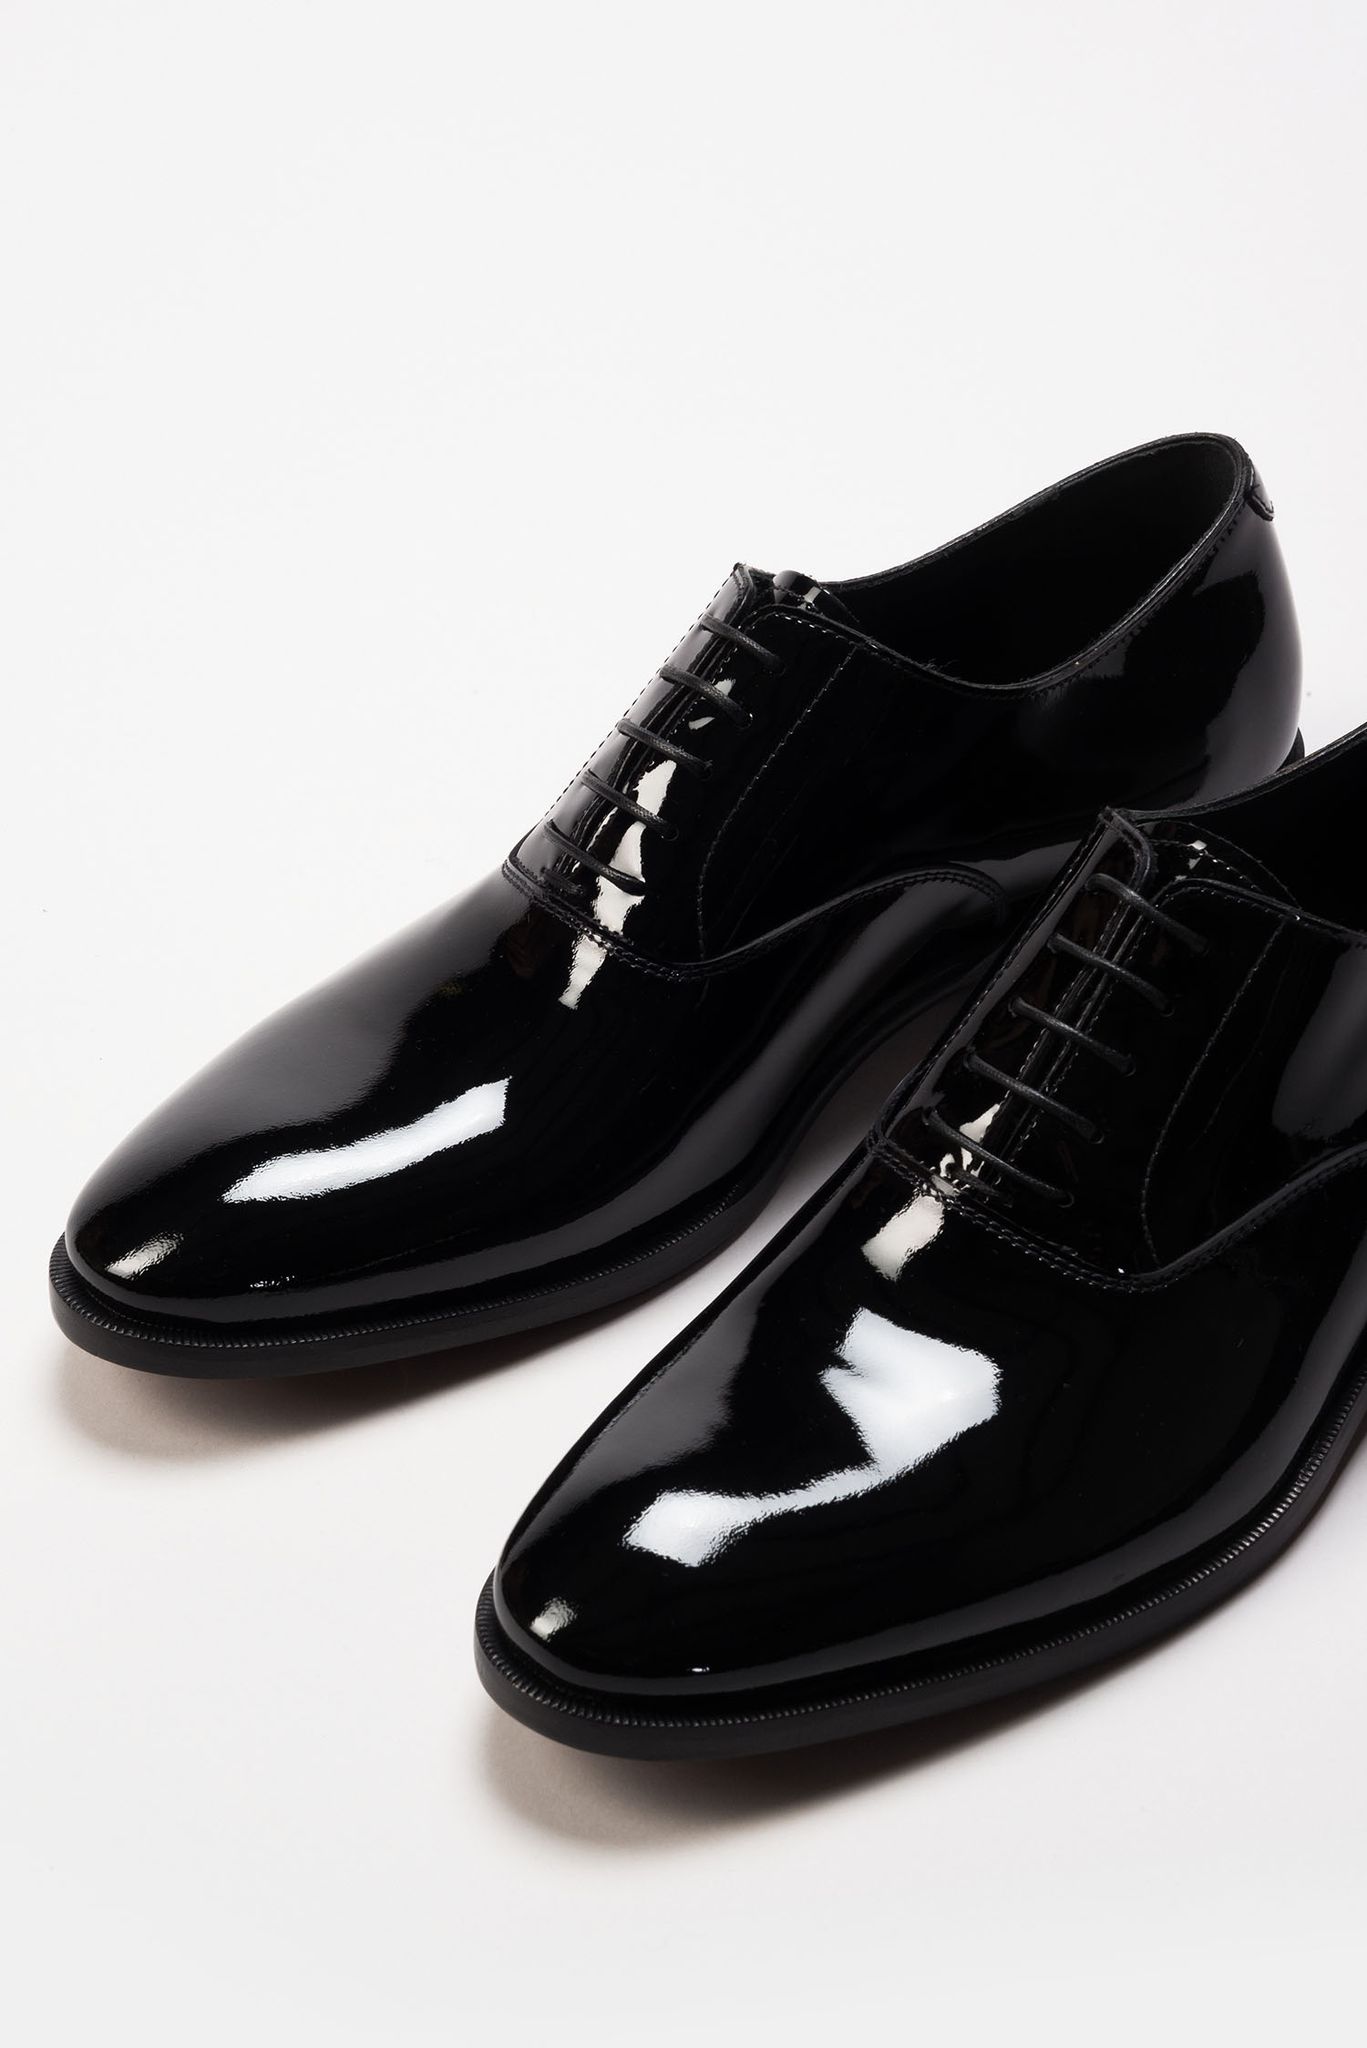 Buy Prince patent leather shoes Black -